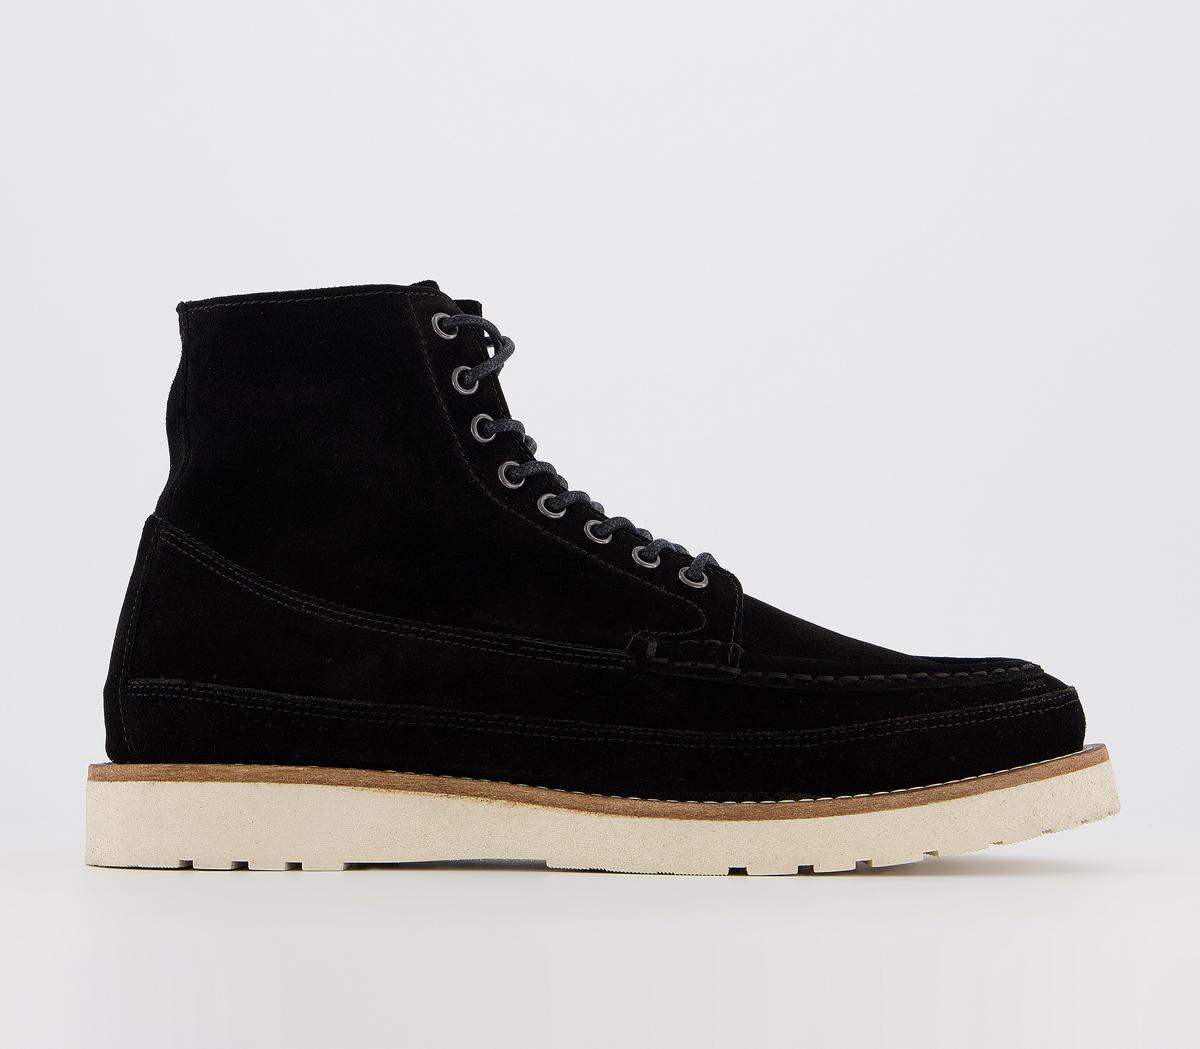 OFFICEBulb Lace BootsBlack Suede